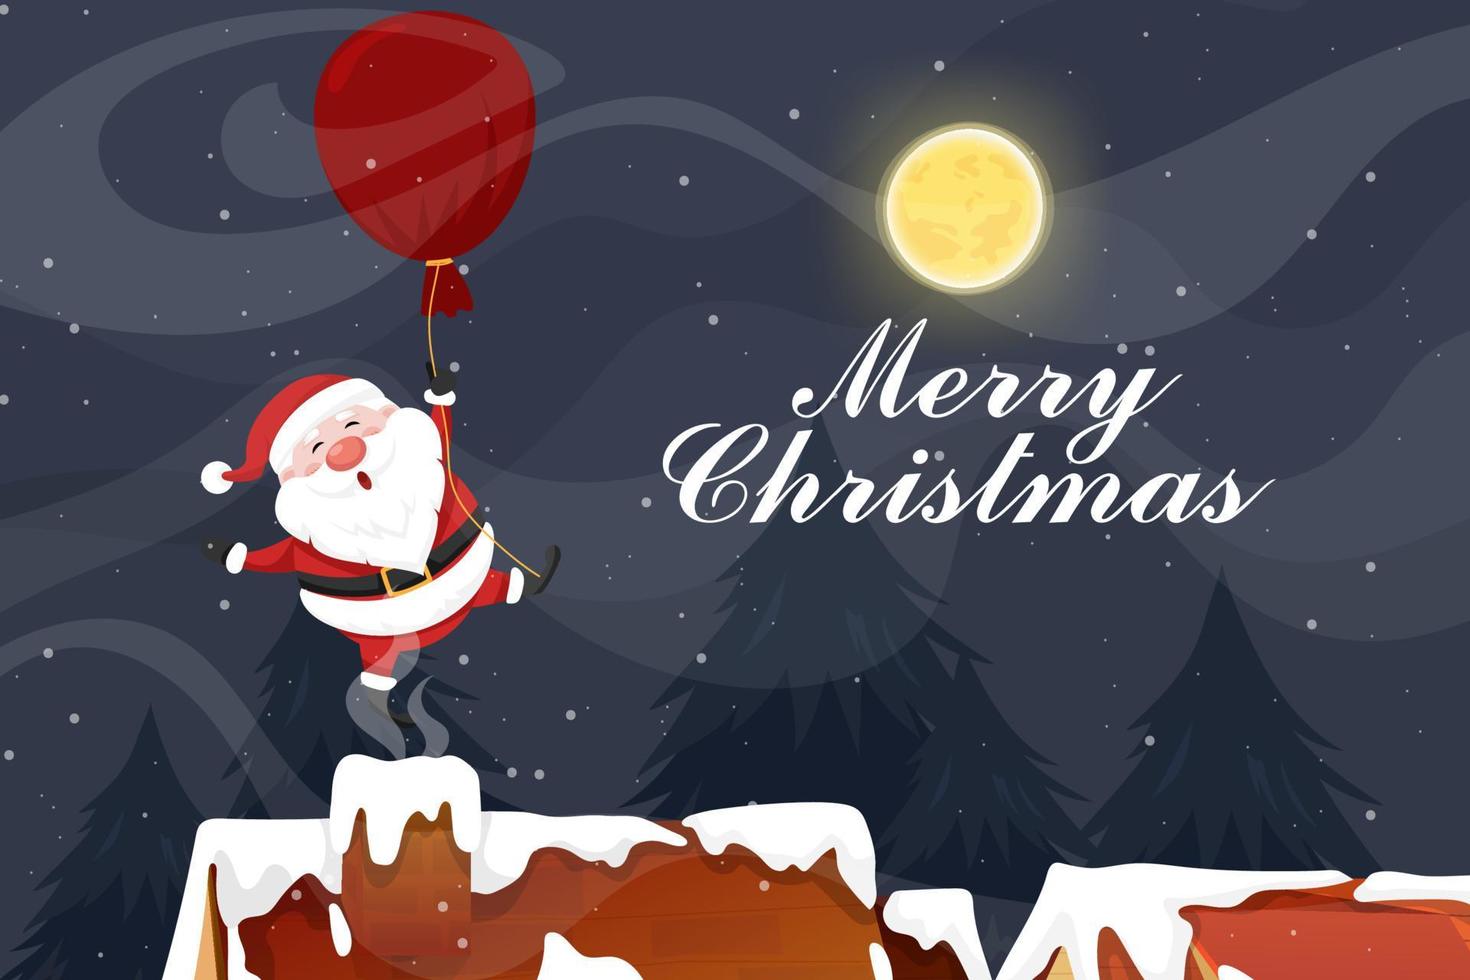 Santa Claus used balloon over rooftop and chimney at the Christmas night with full moon and snowy. vector